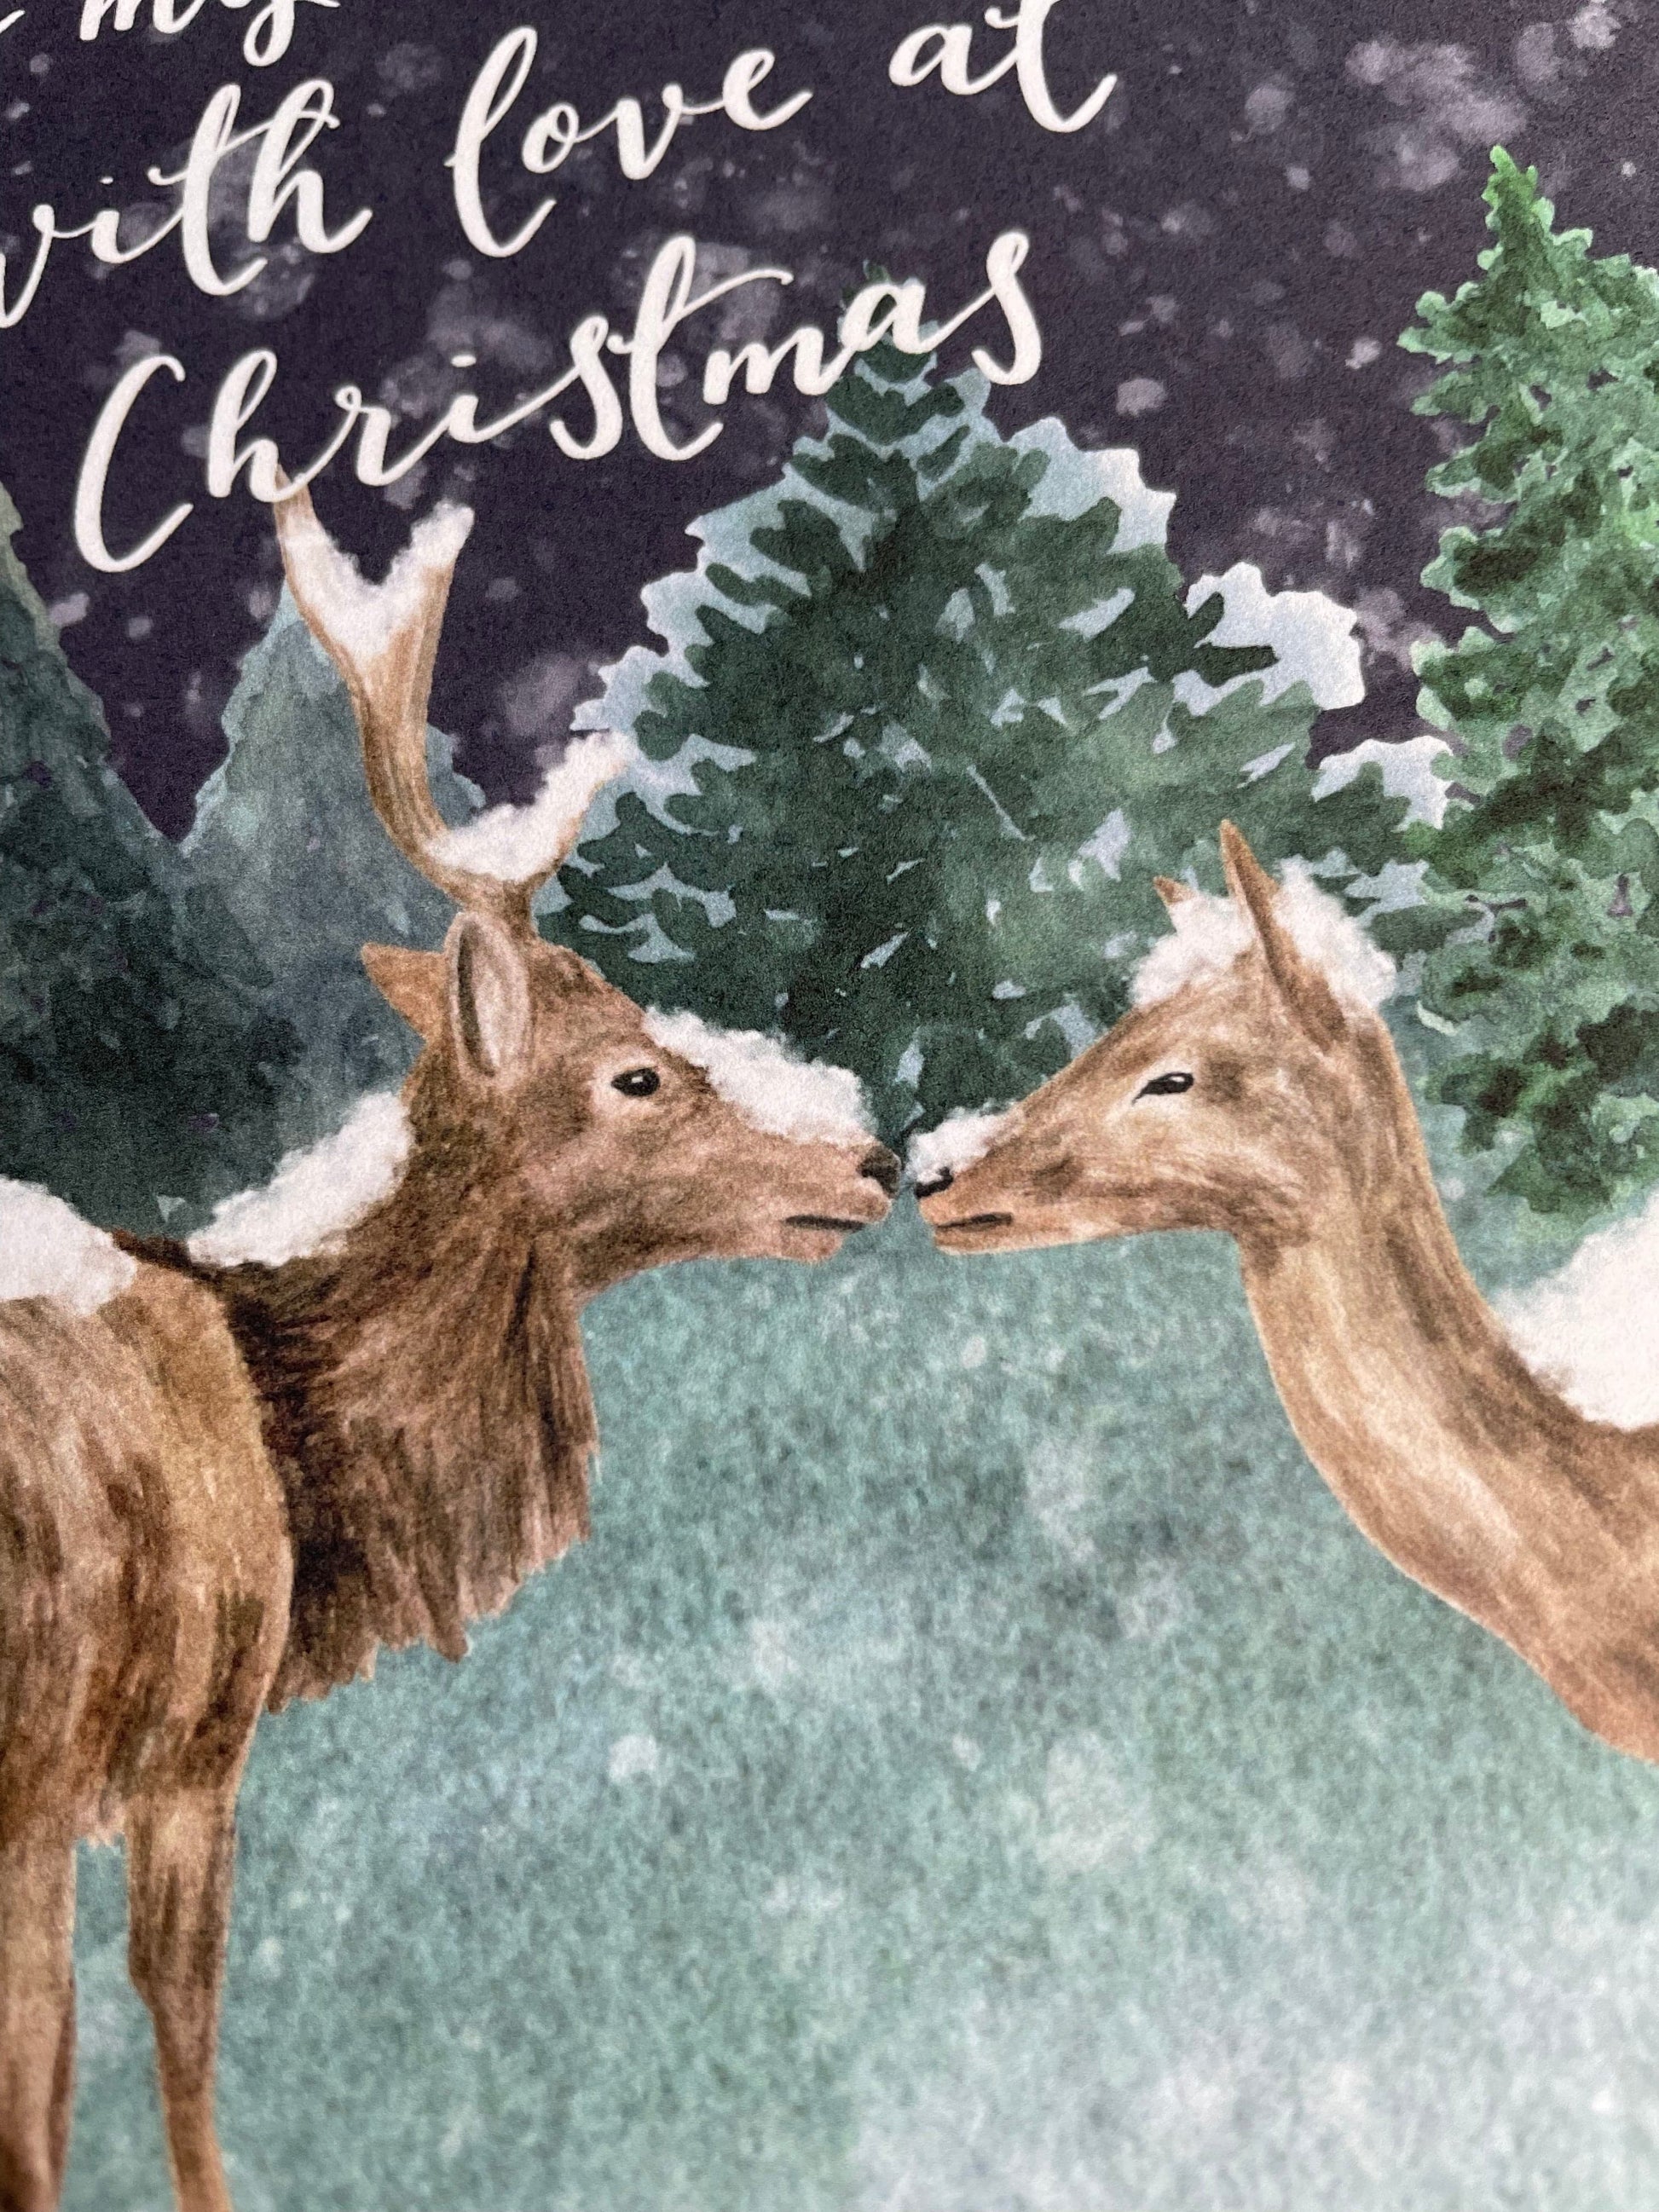 Christmas card for husband And Hope Designs Cards